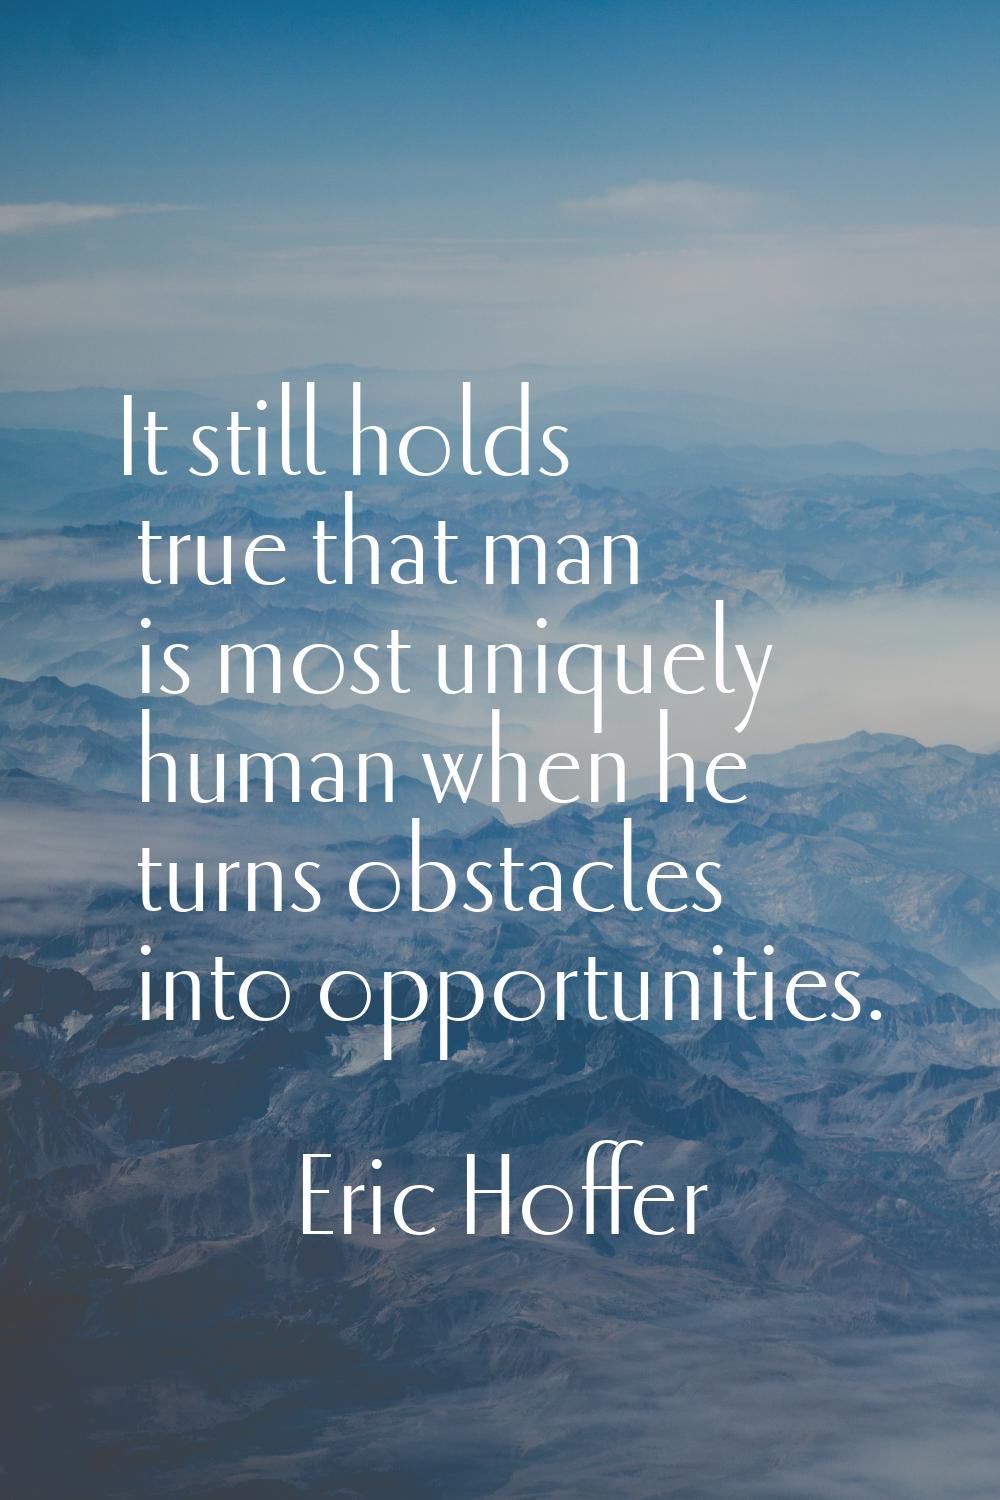 It still holds true that man is most uniquely human when he turns obstacles into opportunities.